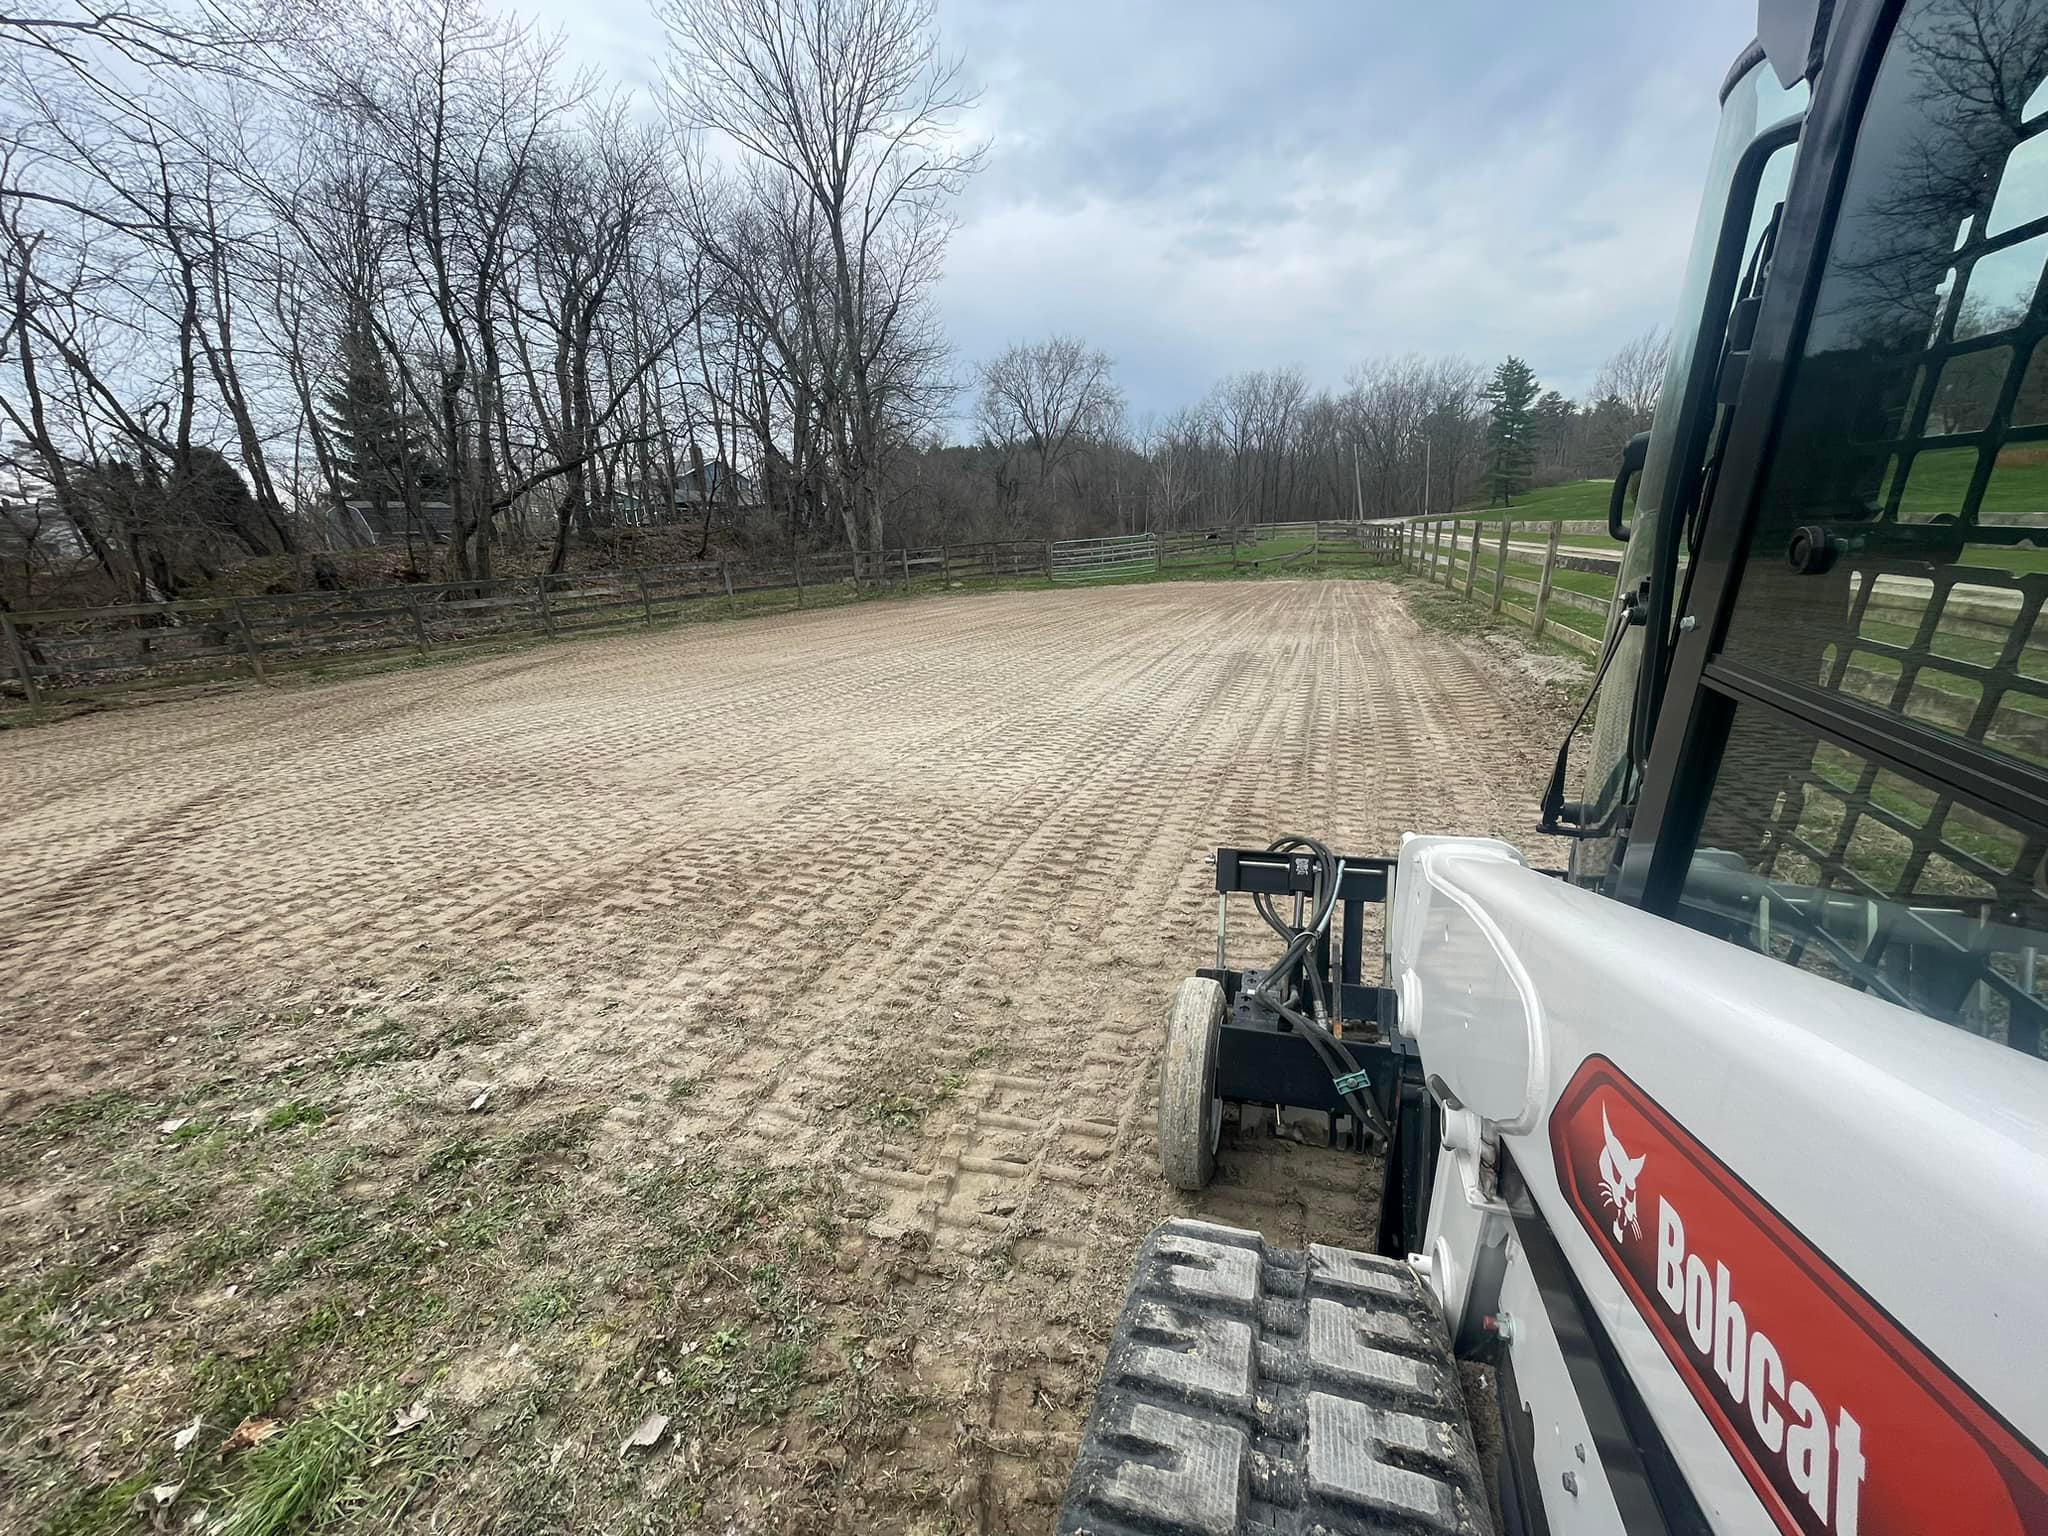 An excavating contractor, Elite Earthworks handles anything that requires a shovel and machine to move dirt—from septic and sewers, to land clearing, pond installation, basement waterproofing, new build and demolition.